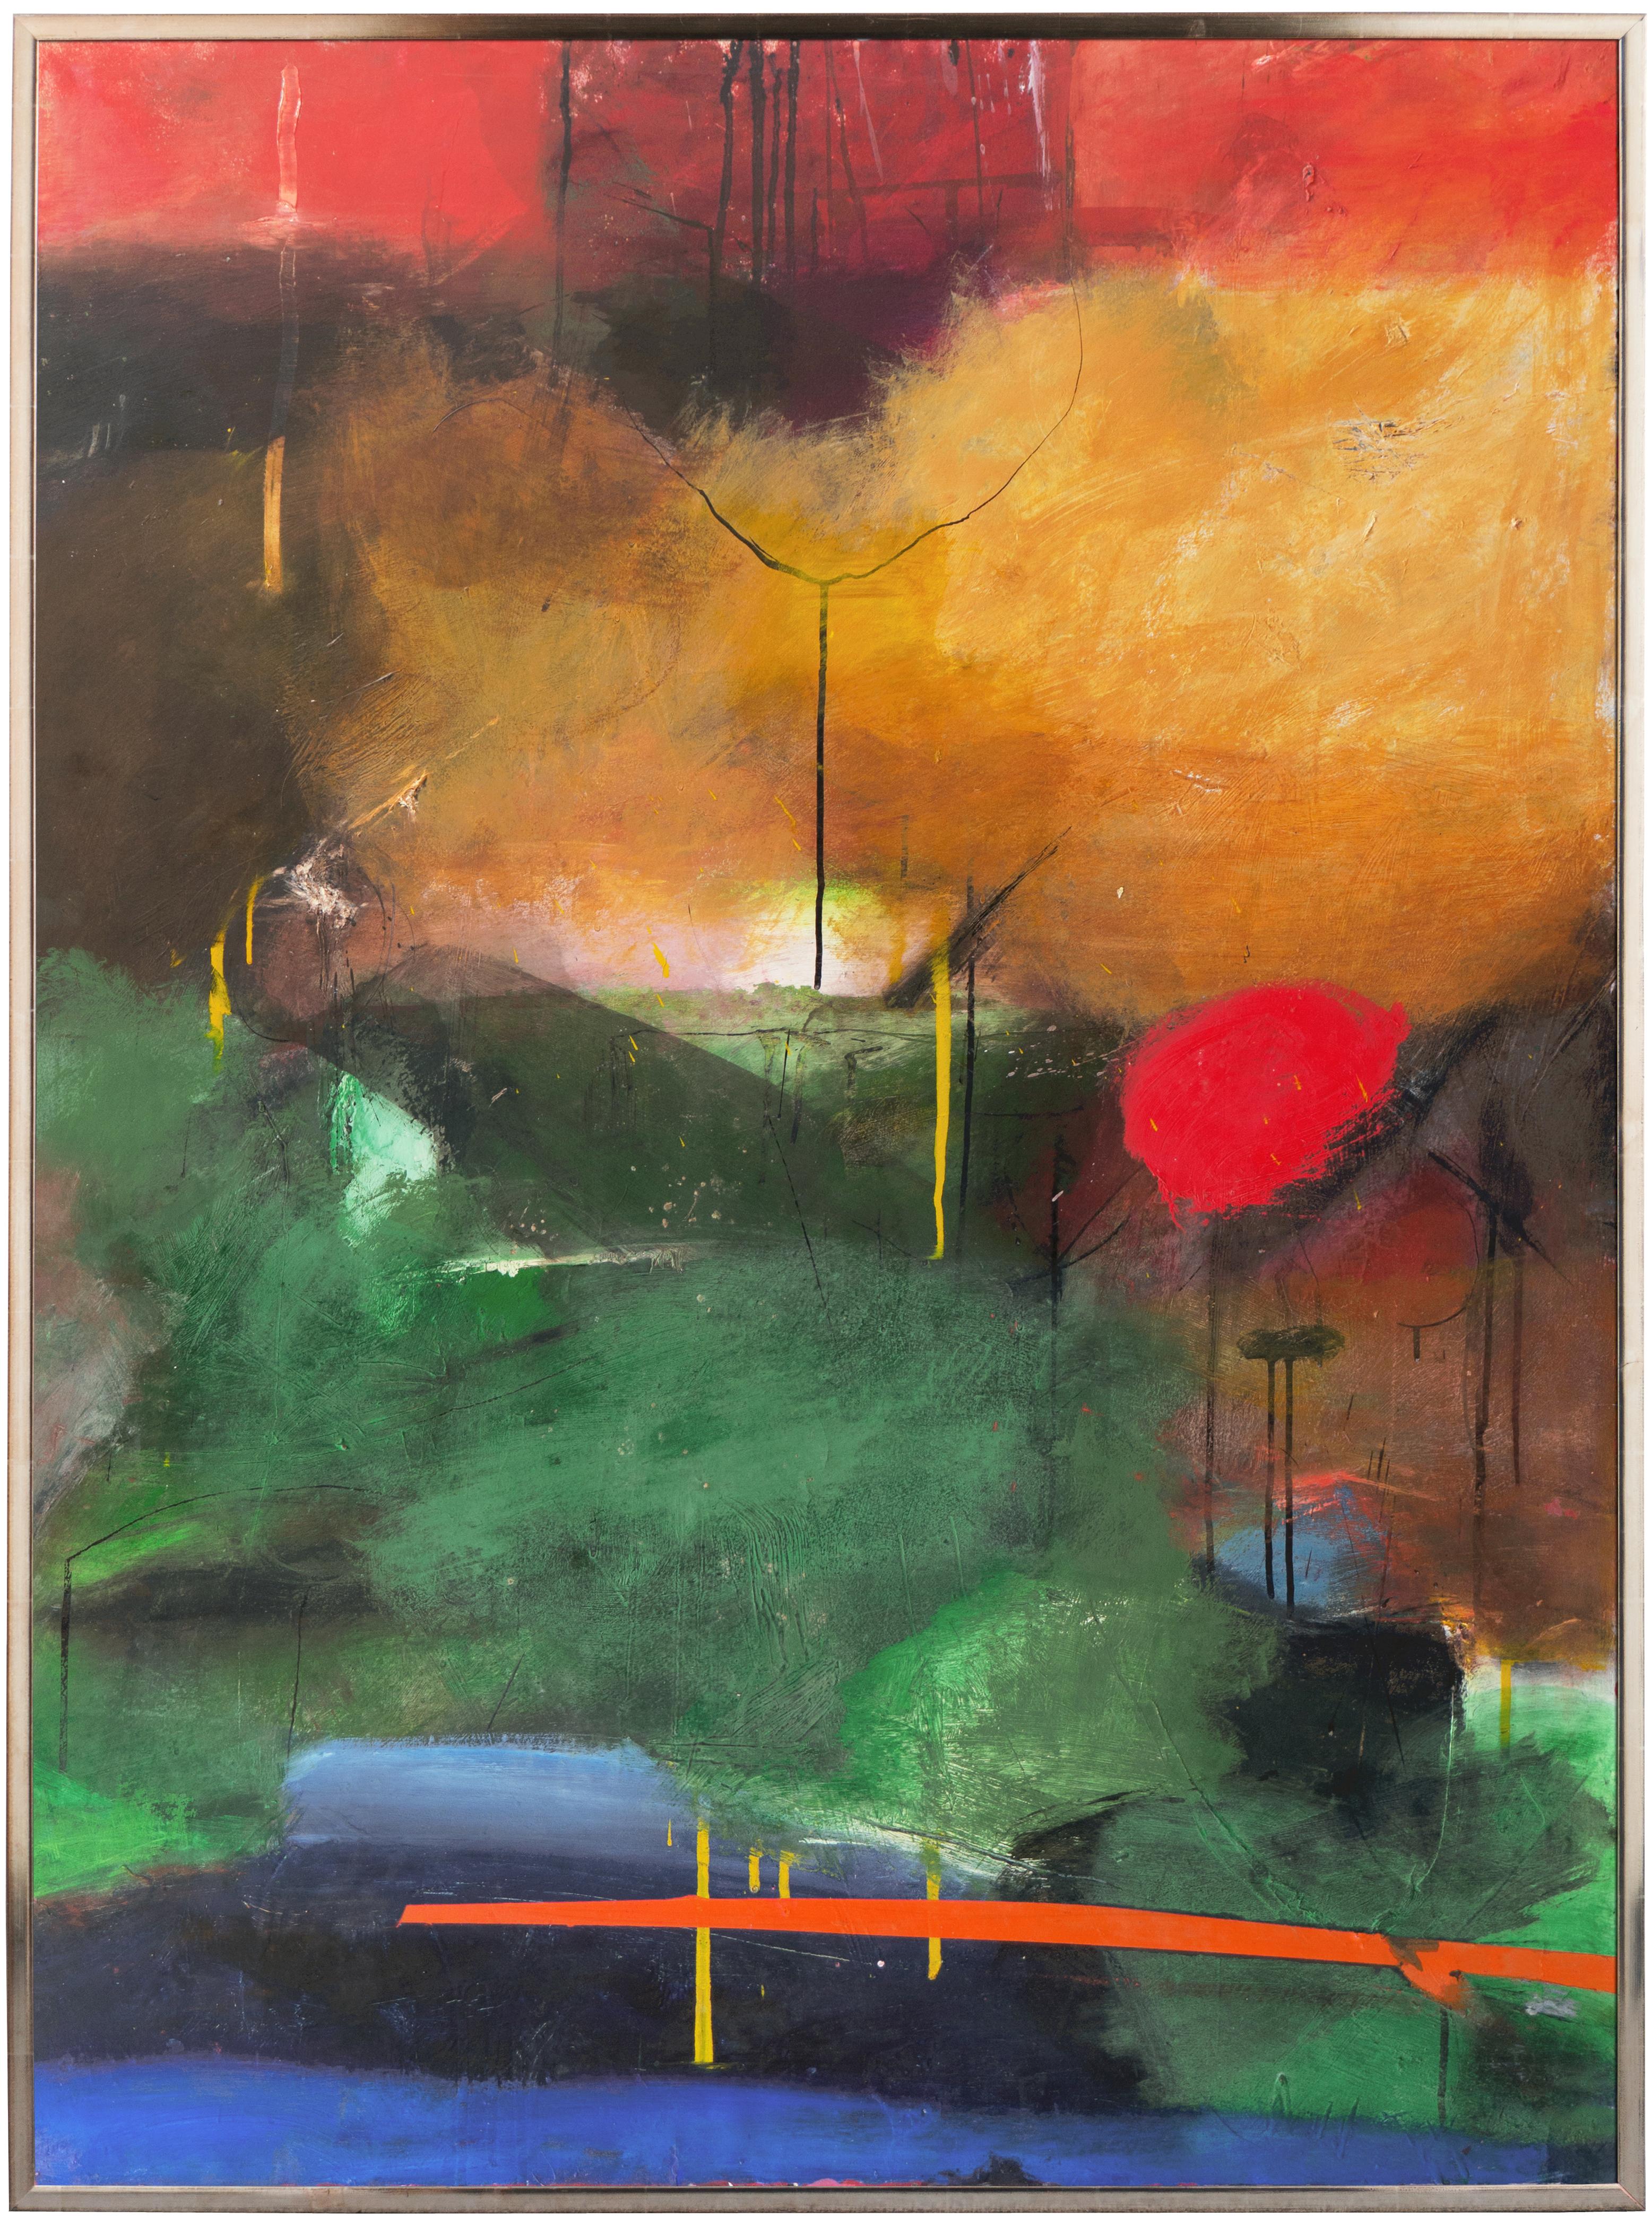 Large Bay Area Oil 'Abstract in Green and Gold', San Francisco Art Institute 3